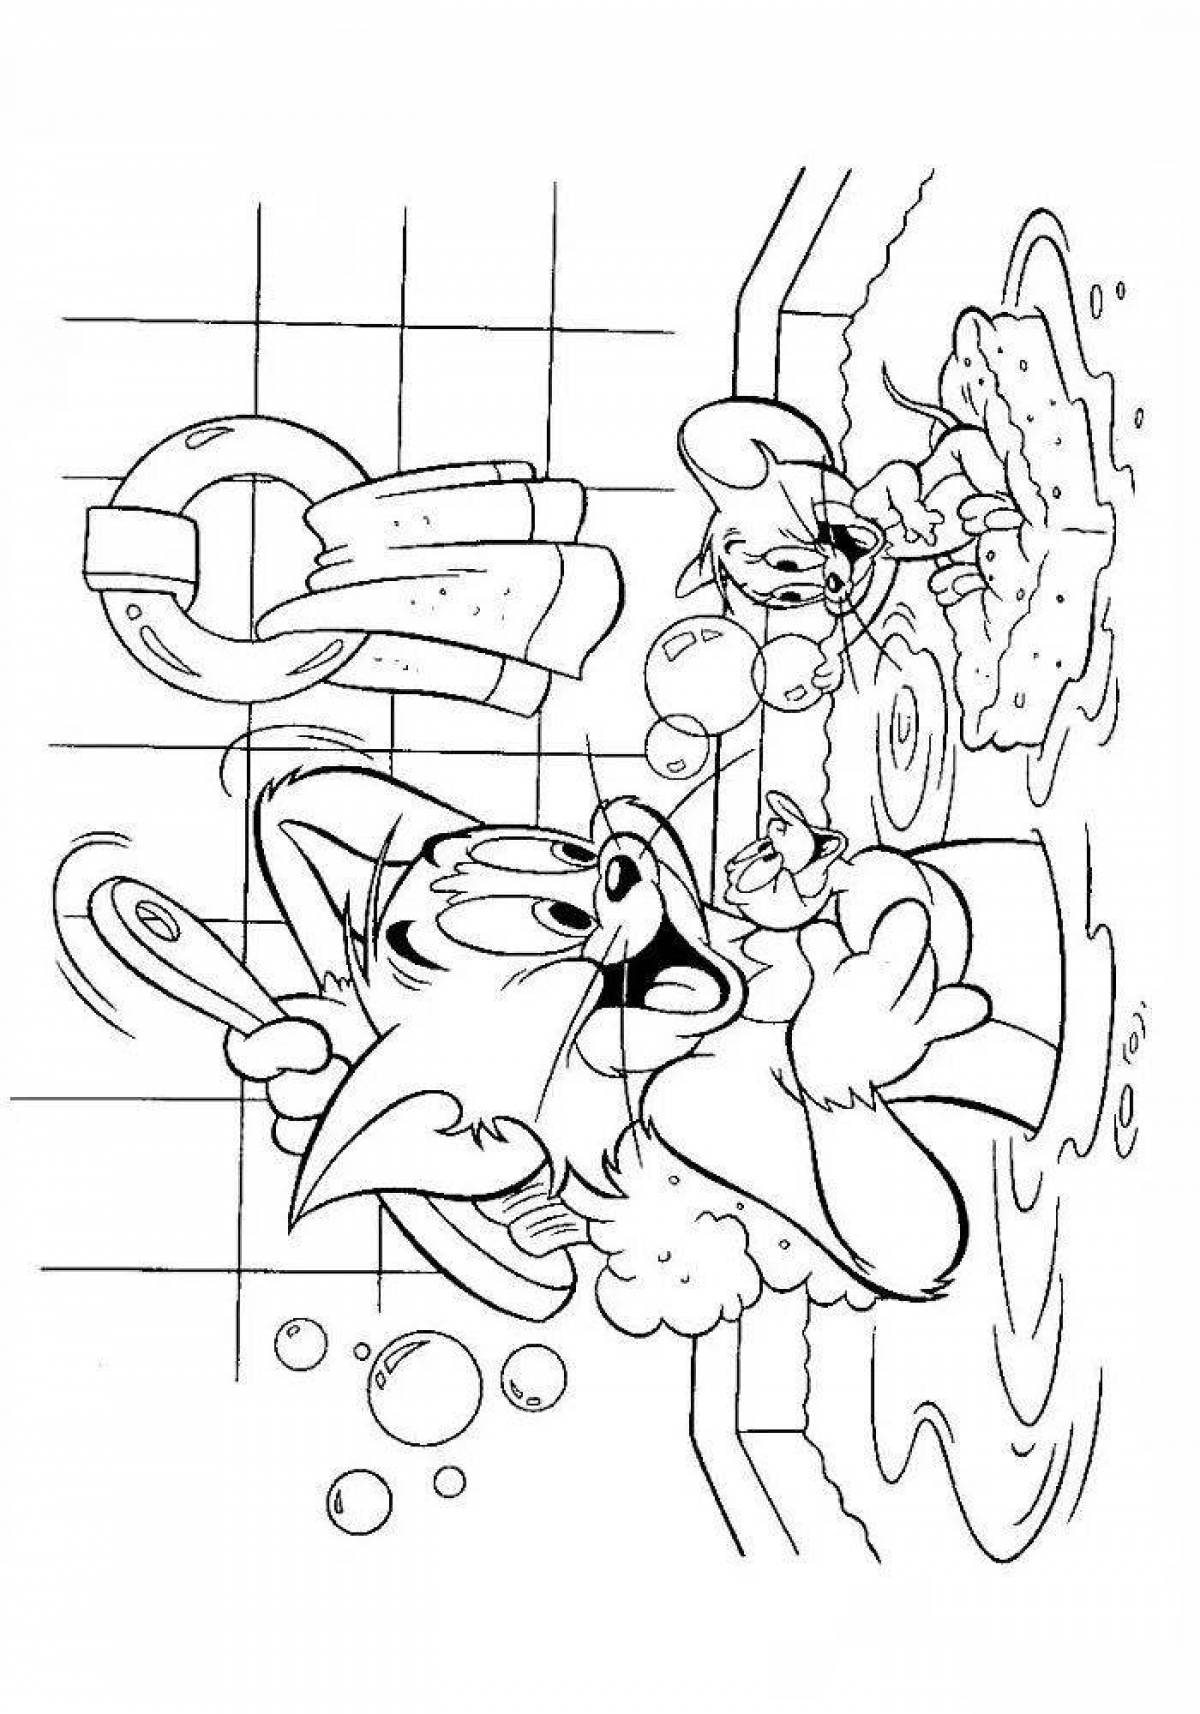 Violent tom and jerry coloring book